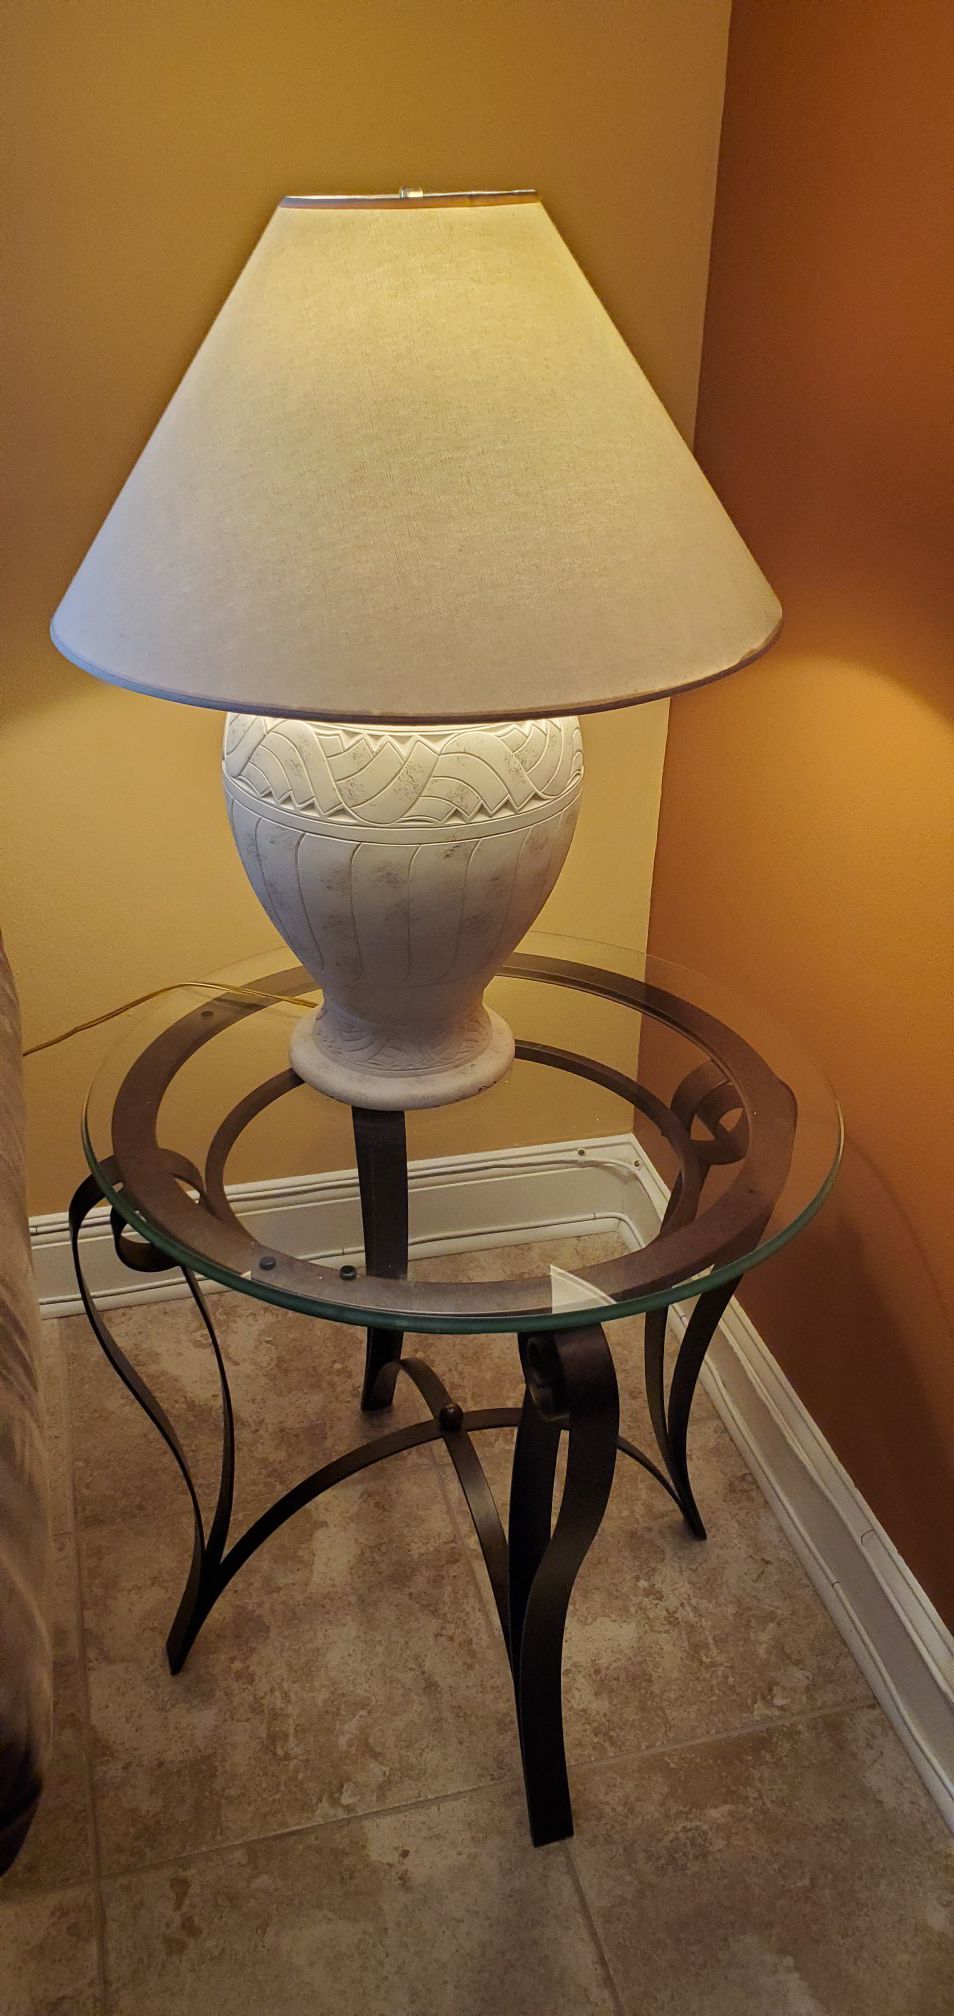 End table with 2 lamps